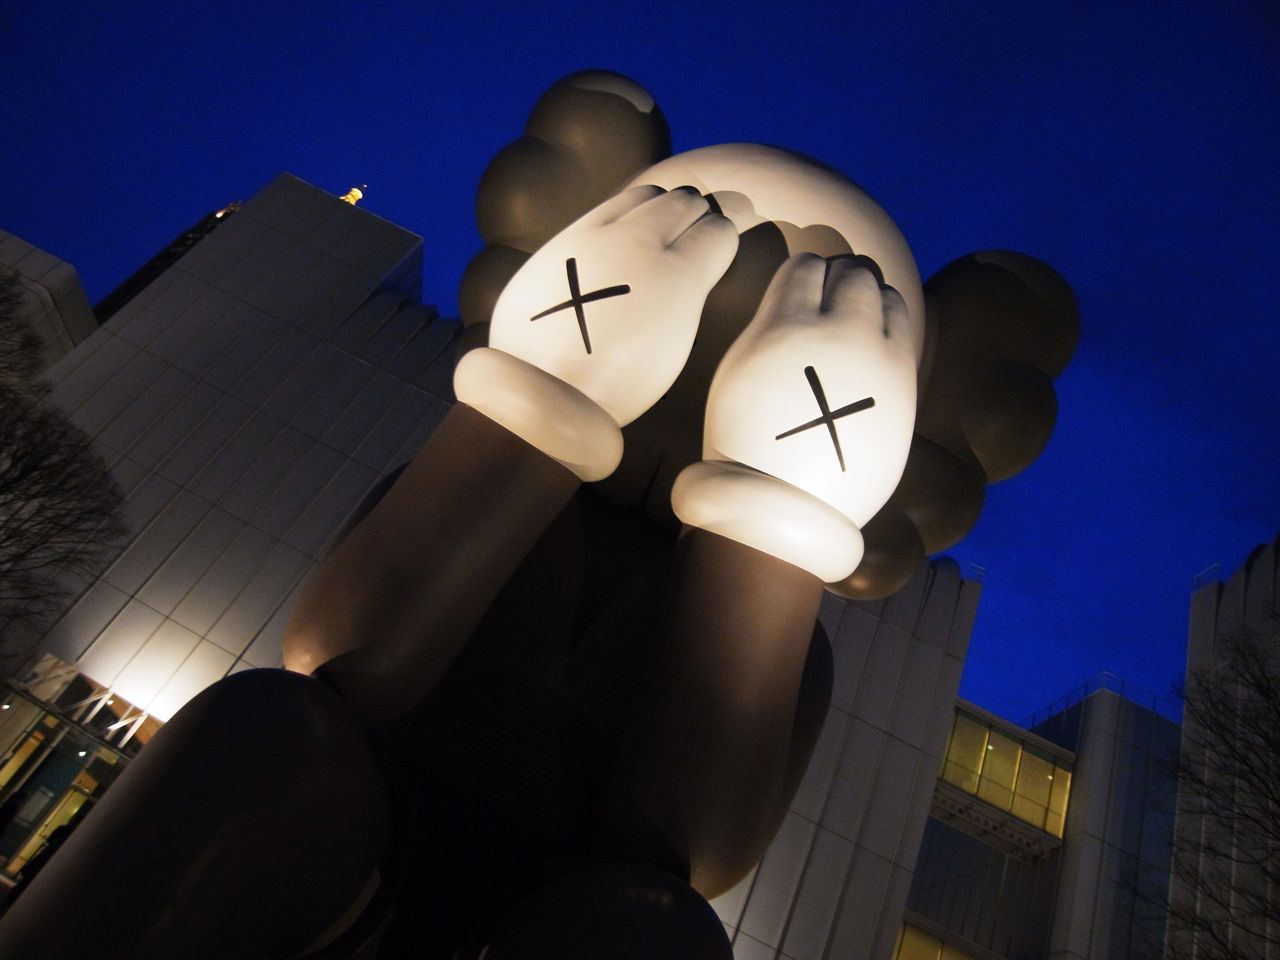 Openings KAWS “Down Time” High Museum of Art